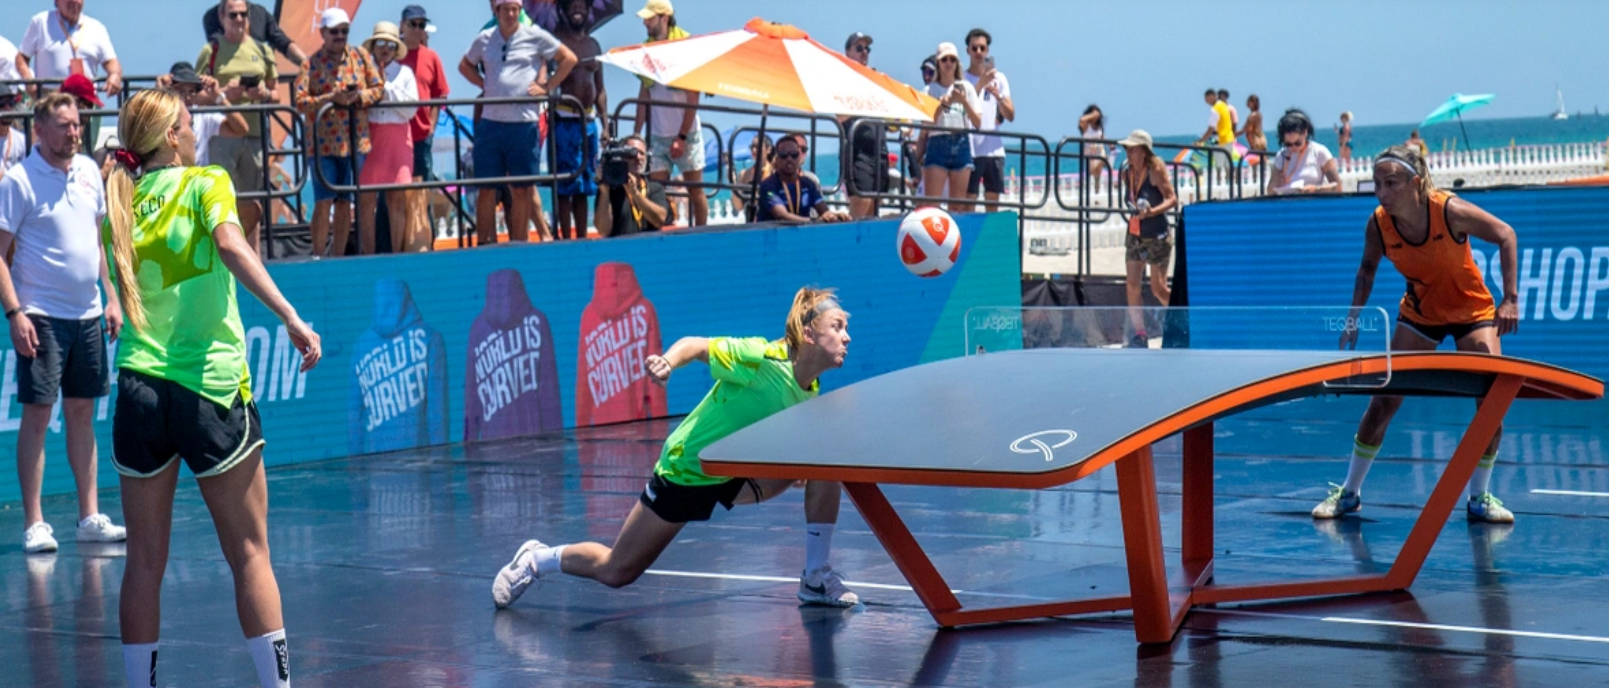 Teqball, "close" to the Olympics, switching focus to grass roots as prepares for European Games debut